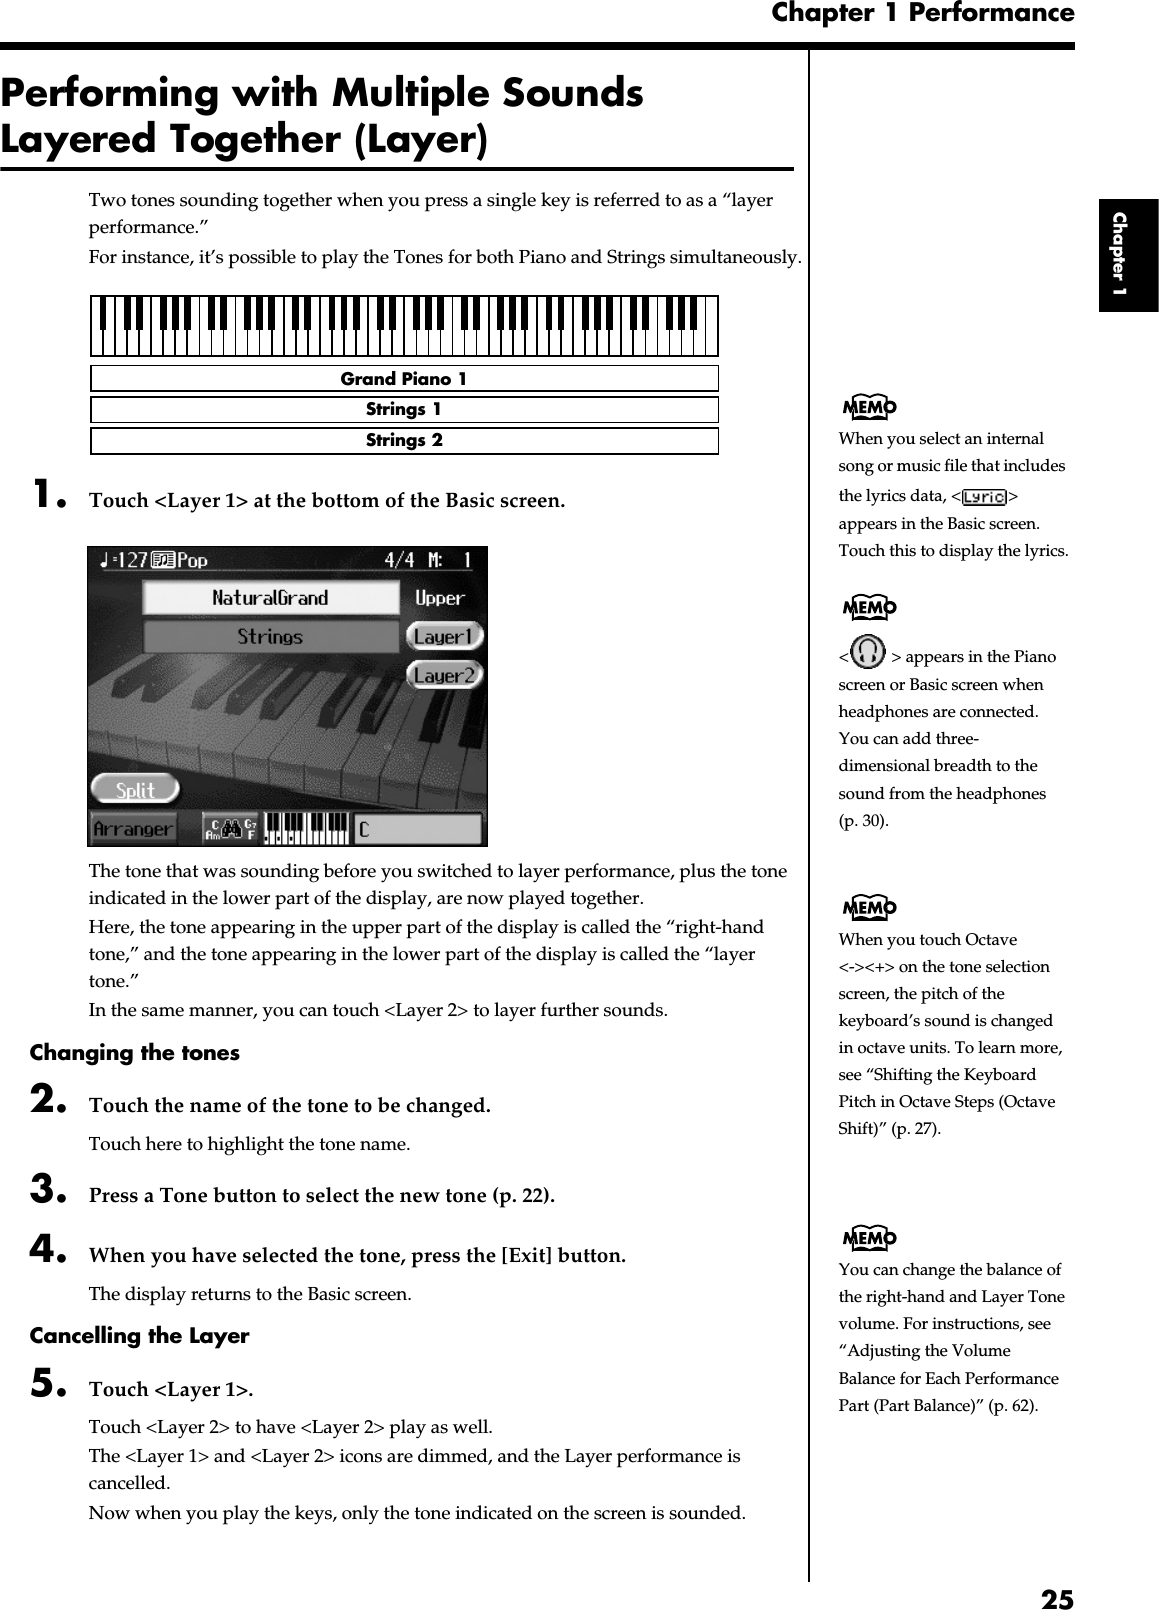 25Chapter 1 PerformanceChapter 1Performing with Multiple Sounds Layered Together (Layer)Two tones sounding together when you press a single key is referred to as a “layer performance.”For instance, it’s possible to play the Tones for both Piano and Strings simultaneously.fig.layer.e1. Touch &lt;Layer 1&gt; at the bottom of the Basic screen.fig.d-layer.eps_60The tone that was sounding before you switched to layer performance, plus the tone indicated in the lower part of the display, are now played together.Here, the tone appearing in the upper part of the display is called the “right-hand tone,” and the tone appearing in the lower part of the display is called the “layer tone.”In the same manner, you can touch &lt;Layer 2&gt; to layer further sounds.Changing the tones2. Touch the name of the tone to be changed.Touch here to highlight the tone name.3. Press a Tone button to select the new tone (p. 22).4. When you have selected the tone, press the [Exit] button.The display returns to the Basic screen.Cancelling the Layer5. Touch &lt;Layer 1&gt;.Touch &lt;Layer 2&gt; to have &lt;Layer 2&gt; play as well.The &lt;Layer 1&gt; and &lt;Layer 2&gt; icons are dimmed, and the Layer performance is cancelled.Now when you play the keys, only the tone indicated on the screen is sounded.Grand Piano 1Strings 1Strings 2 When you select an internal song or music file that includes the lyrics data, &lt; &gt; appears in the Basic screen. Touch this to display the lyrics.&lt;  &gt; appears in the Piano screen or Basic screen when headphones are connected.You can add three-dimensional breadth to the sound from the headphones (p. 30).When you touch Octave &lt;-&gt;&lt;+&gt; on the tone selection screen, the pitch of the keyboard’s sound is changed in octave units. To learn more, see “Shifting the Keyboard Pitch in Octave Steps (Octave Shift)” (p. 27).You can change the balance of the right-hand and Layer Tone volume. For instructions, see “Adjusting the Volume Balance for Each Performance Part (Part Balance)” (p. 62).